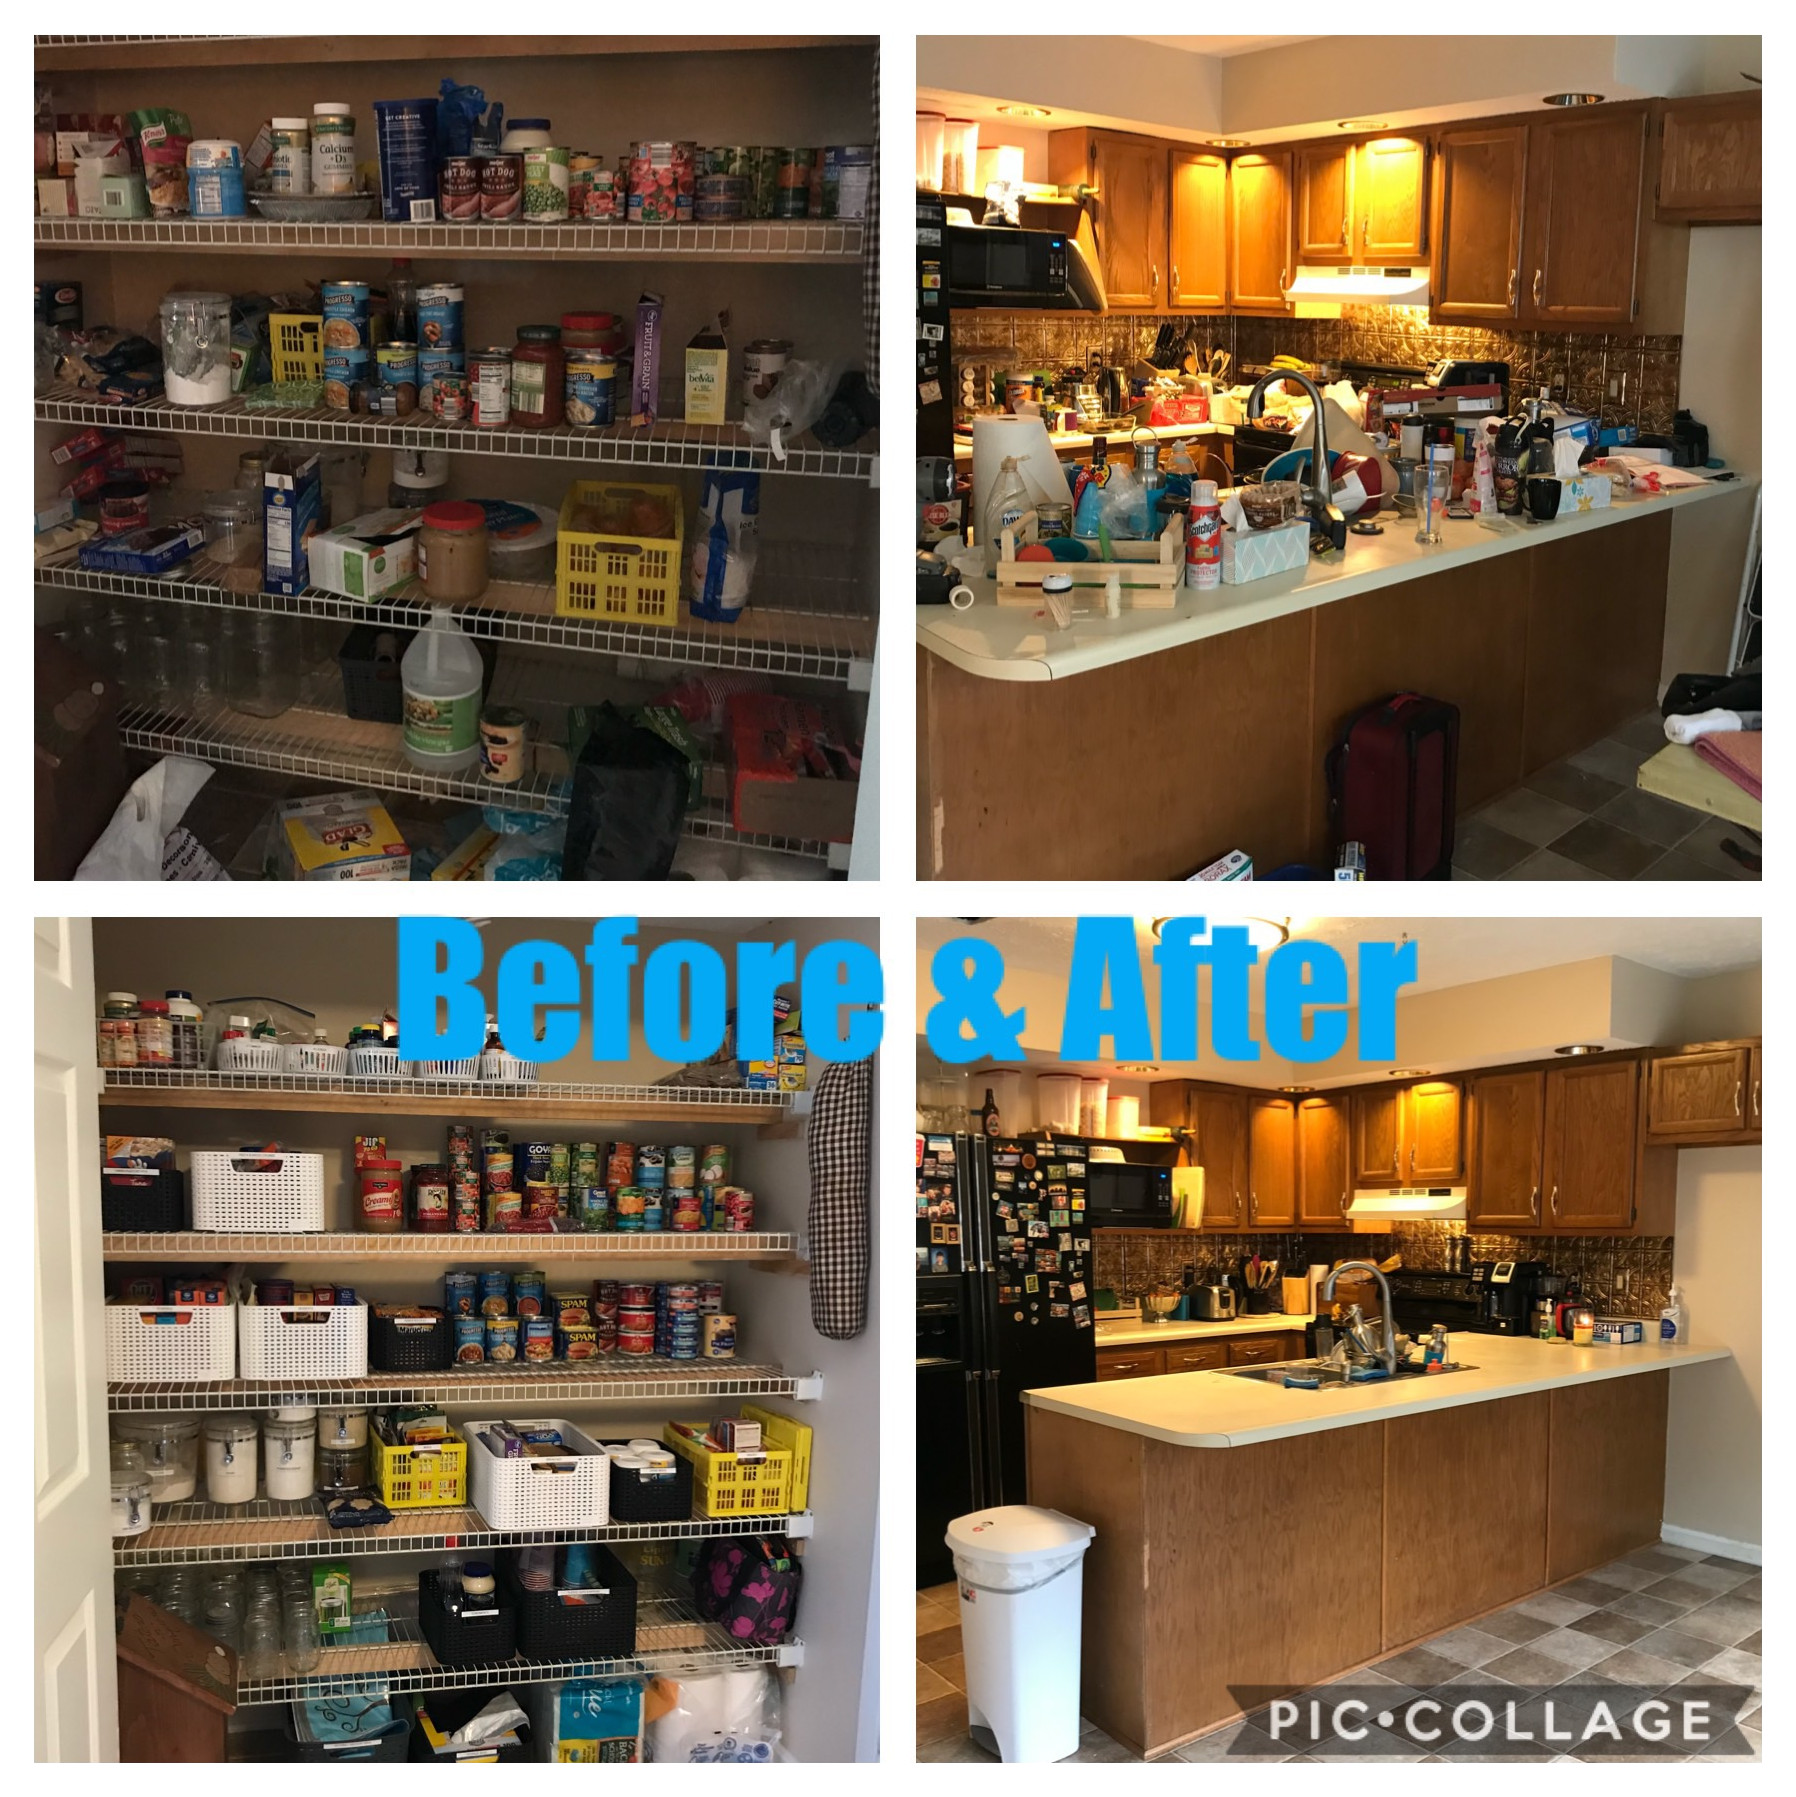 Kitchen and pantry before & after